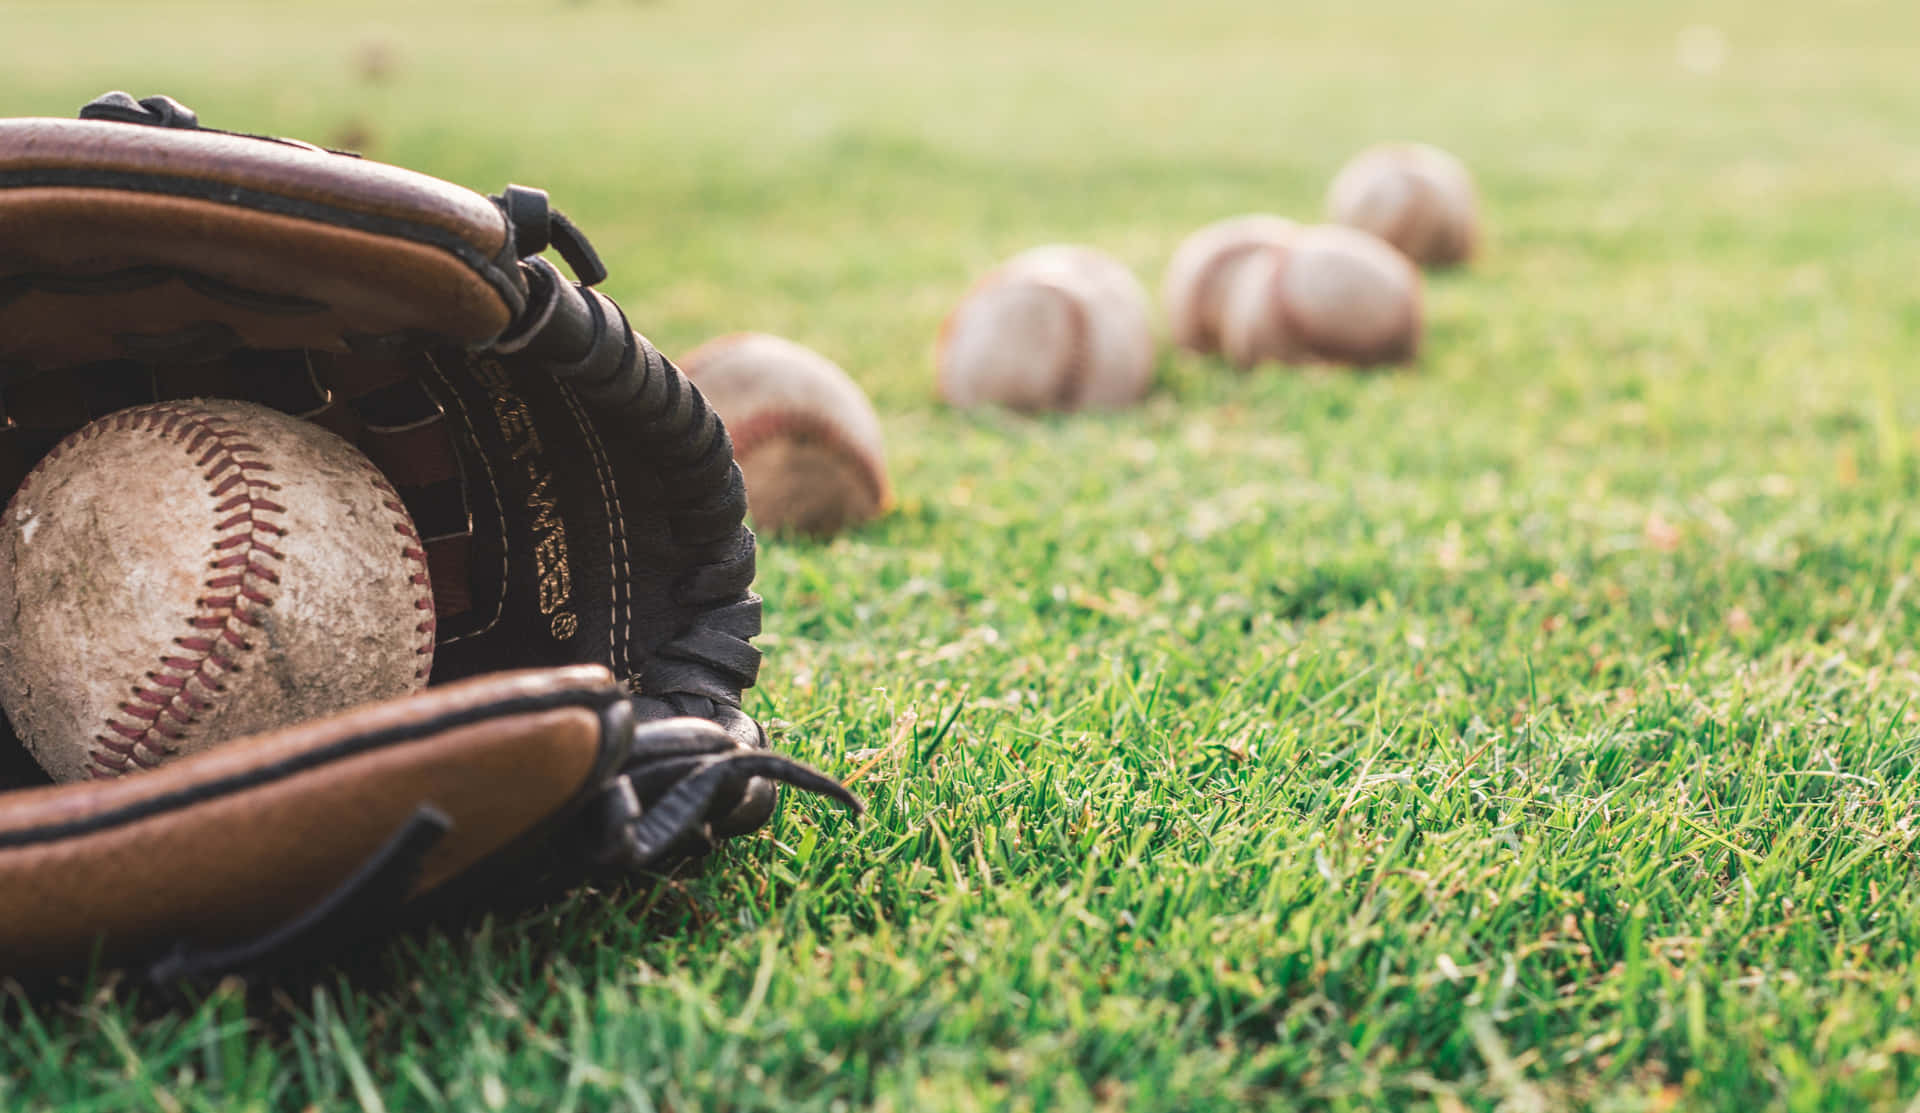 A high-quality image of baseball gloves stacked together on a wooden background Wallpaper